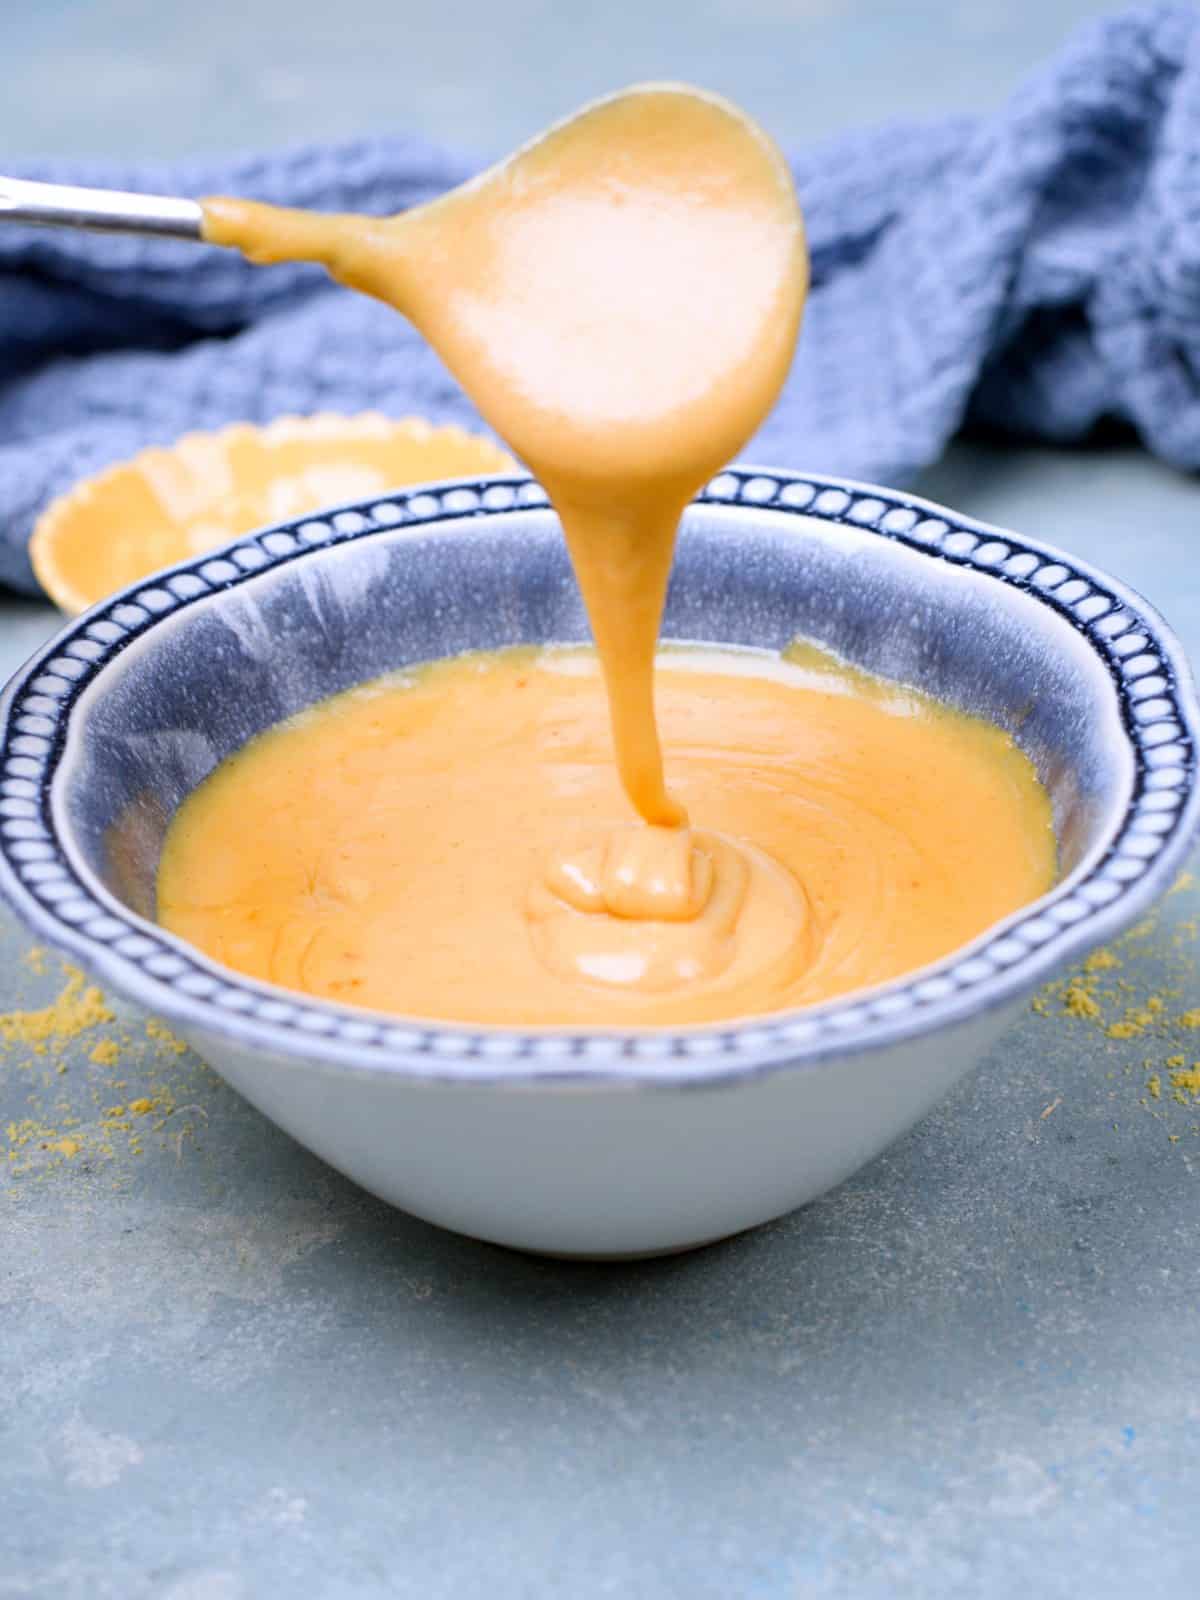 Mustard in a blue romantic bowl and spoon pouring it from the air showing the consistency. Some yellow mustard powder decorates the blue background,.